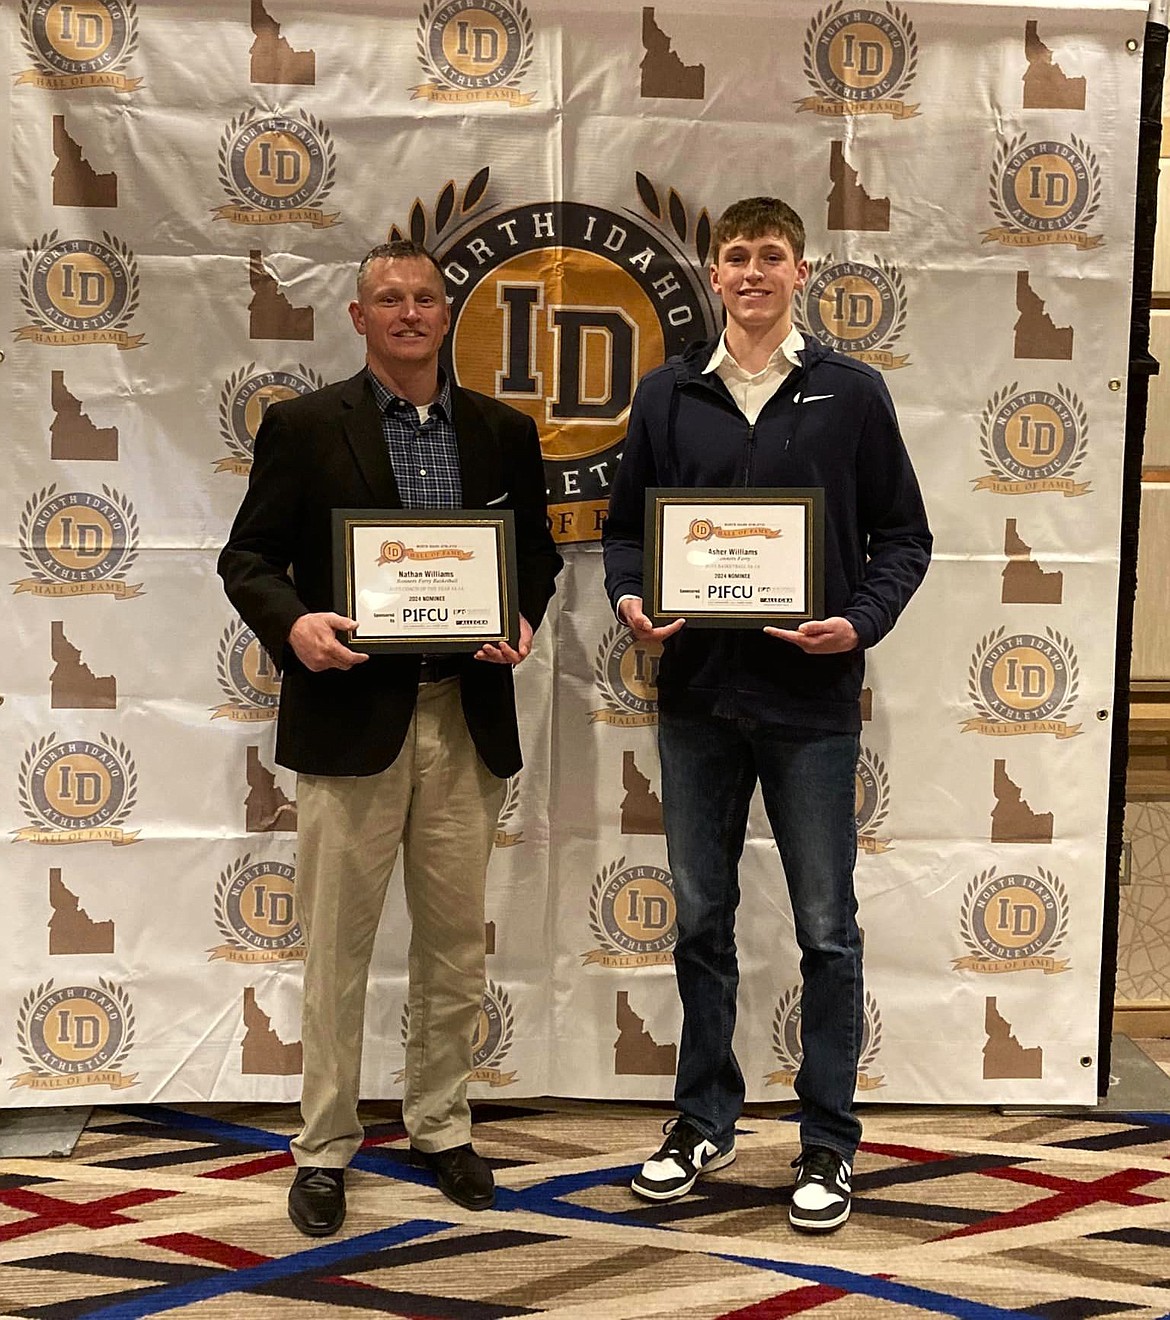 (left) Nathan Williams was a finalist for 3A-1A boys coach of the year and Asher Williams was named 3A-1A co-boys basketball player of the year by the North Idaho Hall of Fame on Saturday, April 6.